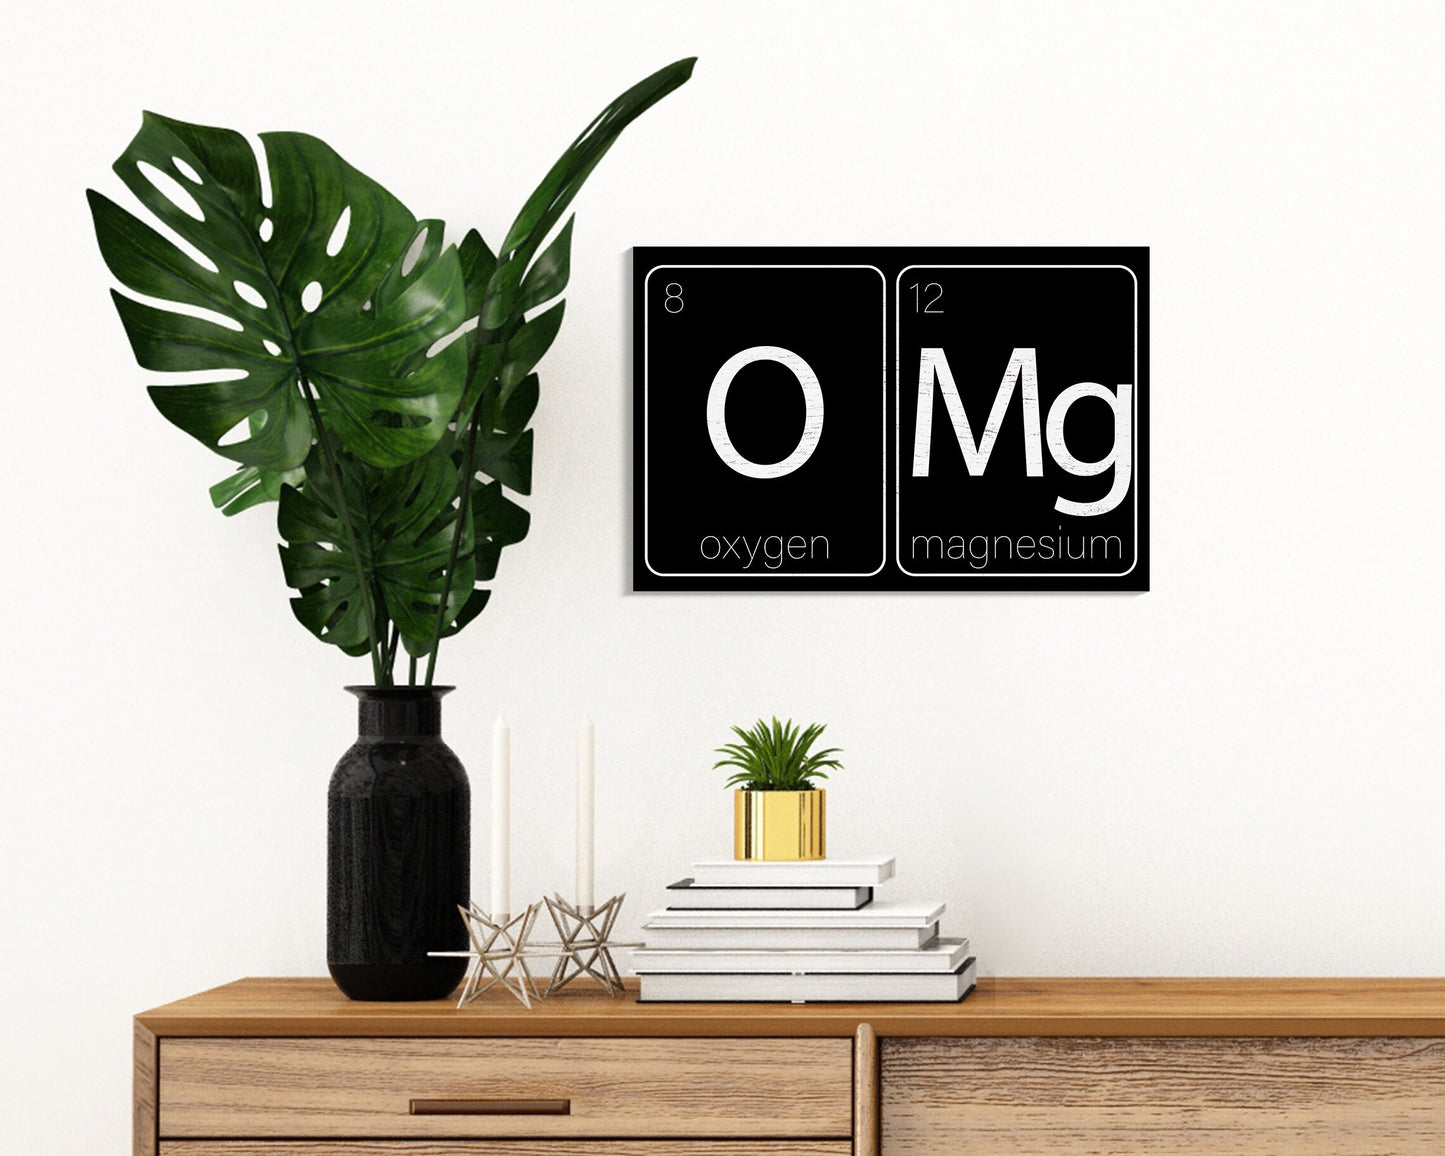 Laugh Out Loud with Chemistry: 7.5in x 5in Wooden Wall Decor Sign - "OMG  Oxygen and Magnesium" - Witty & Fun